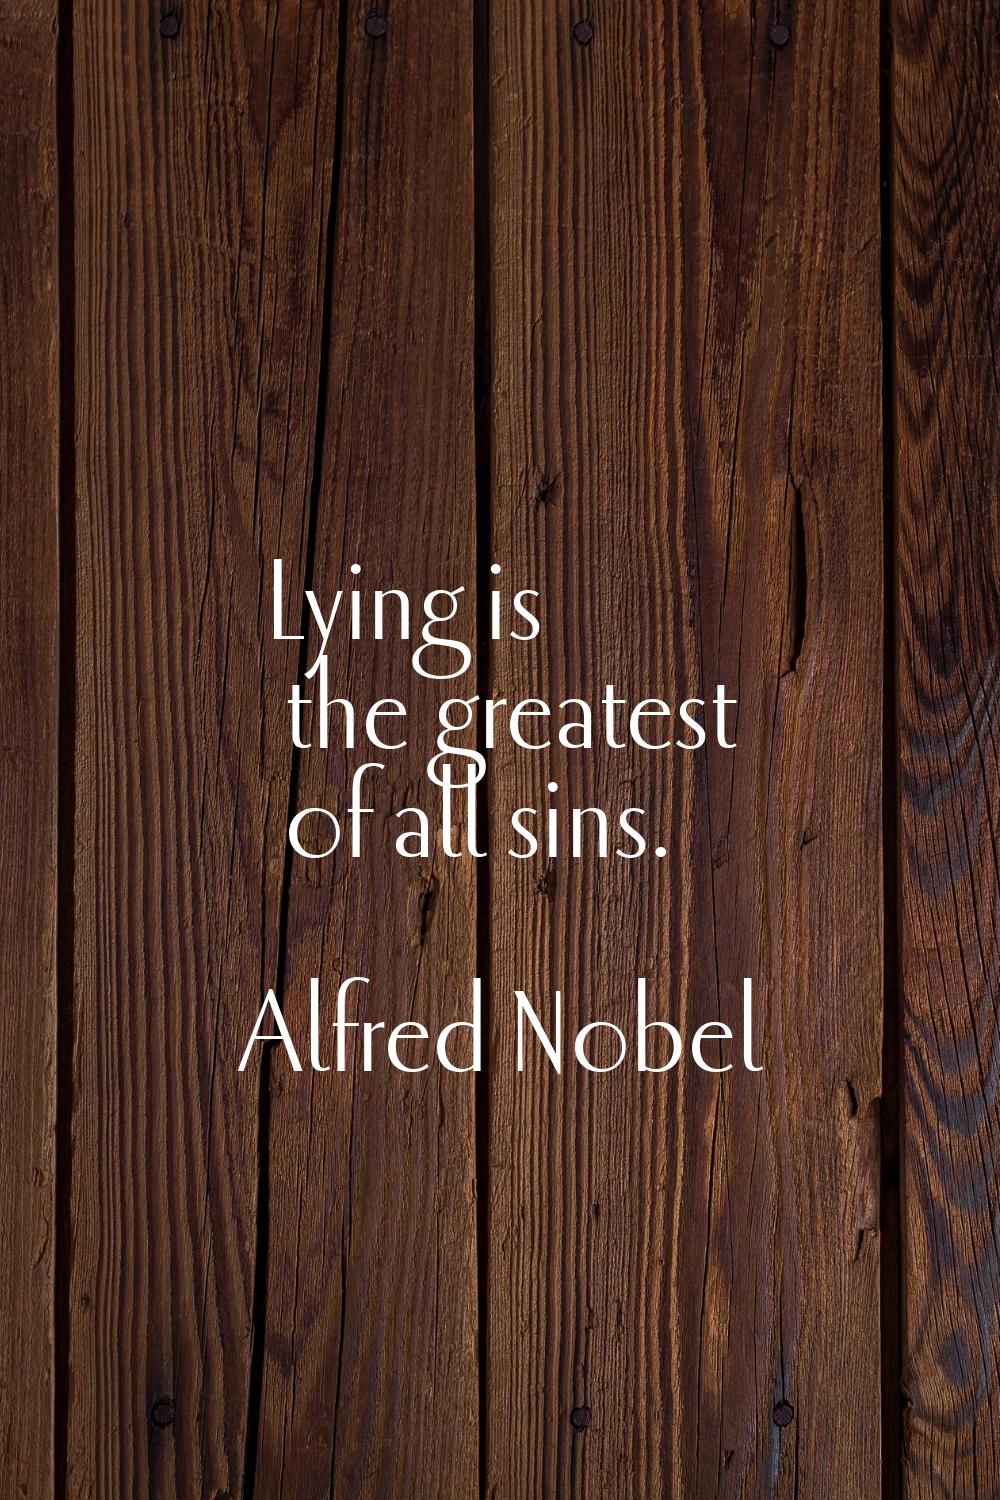 Lying is the greatest of all sins.